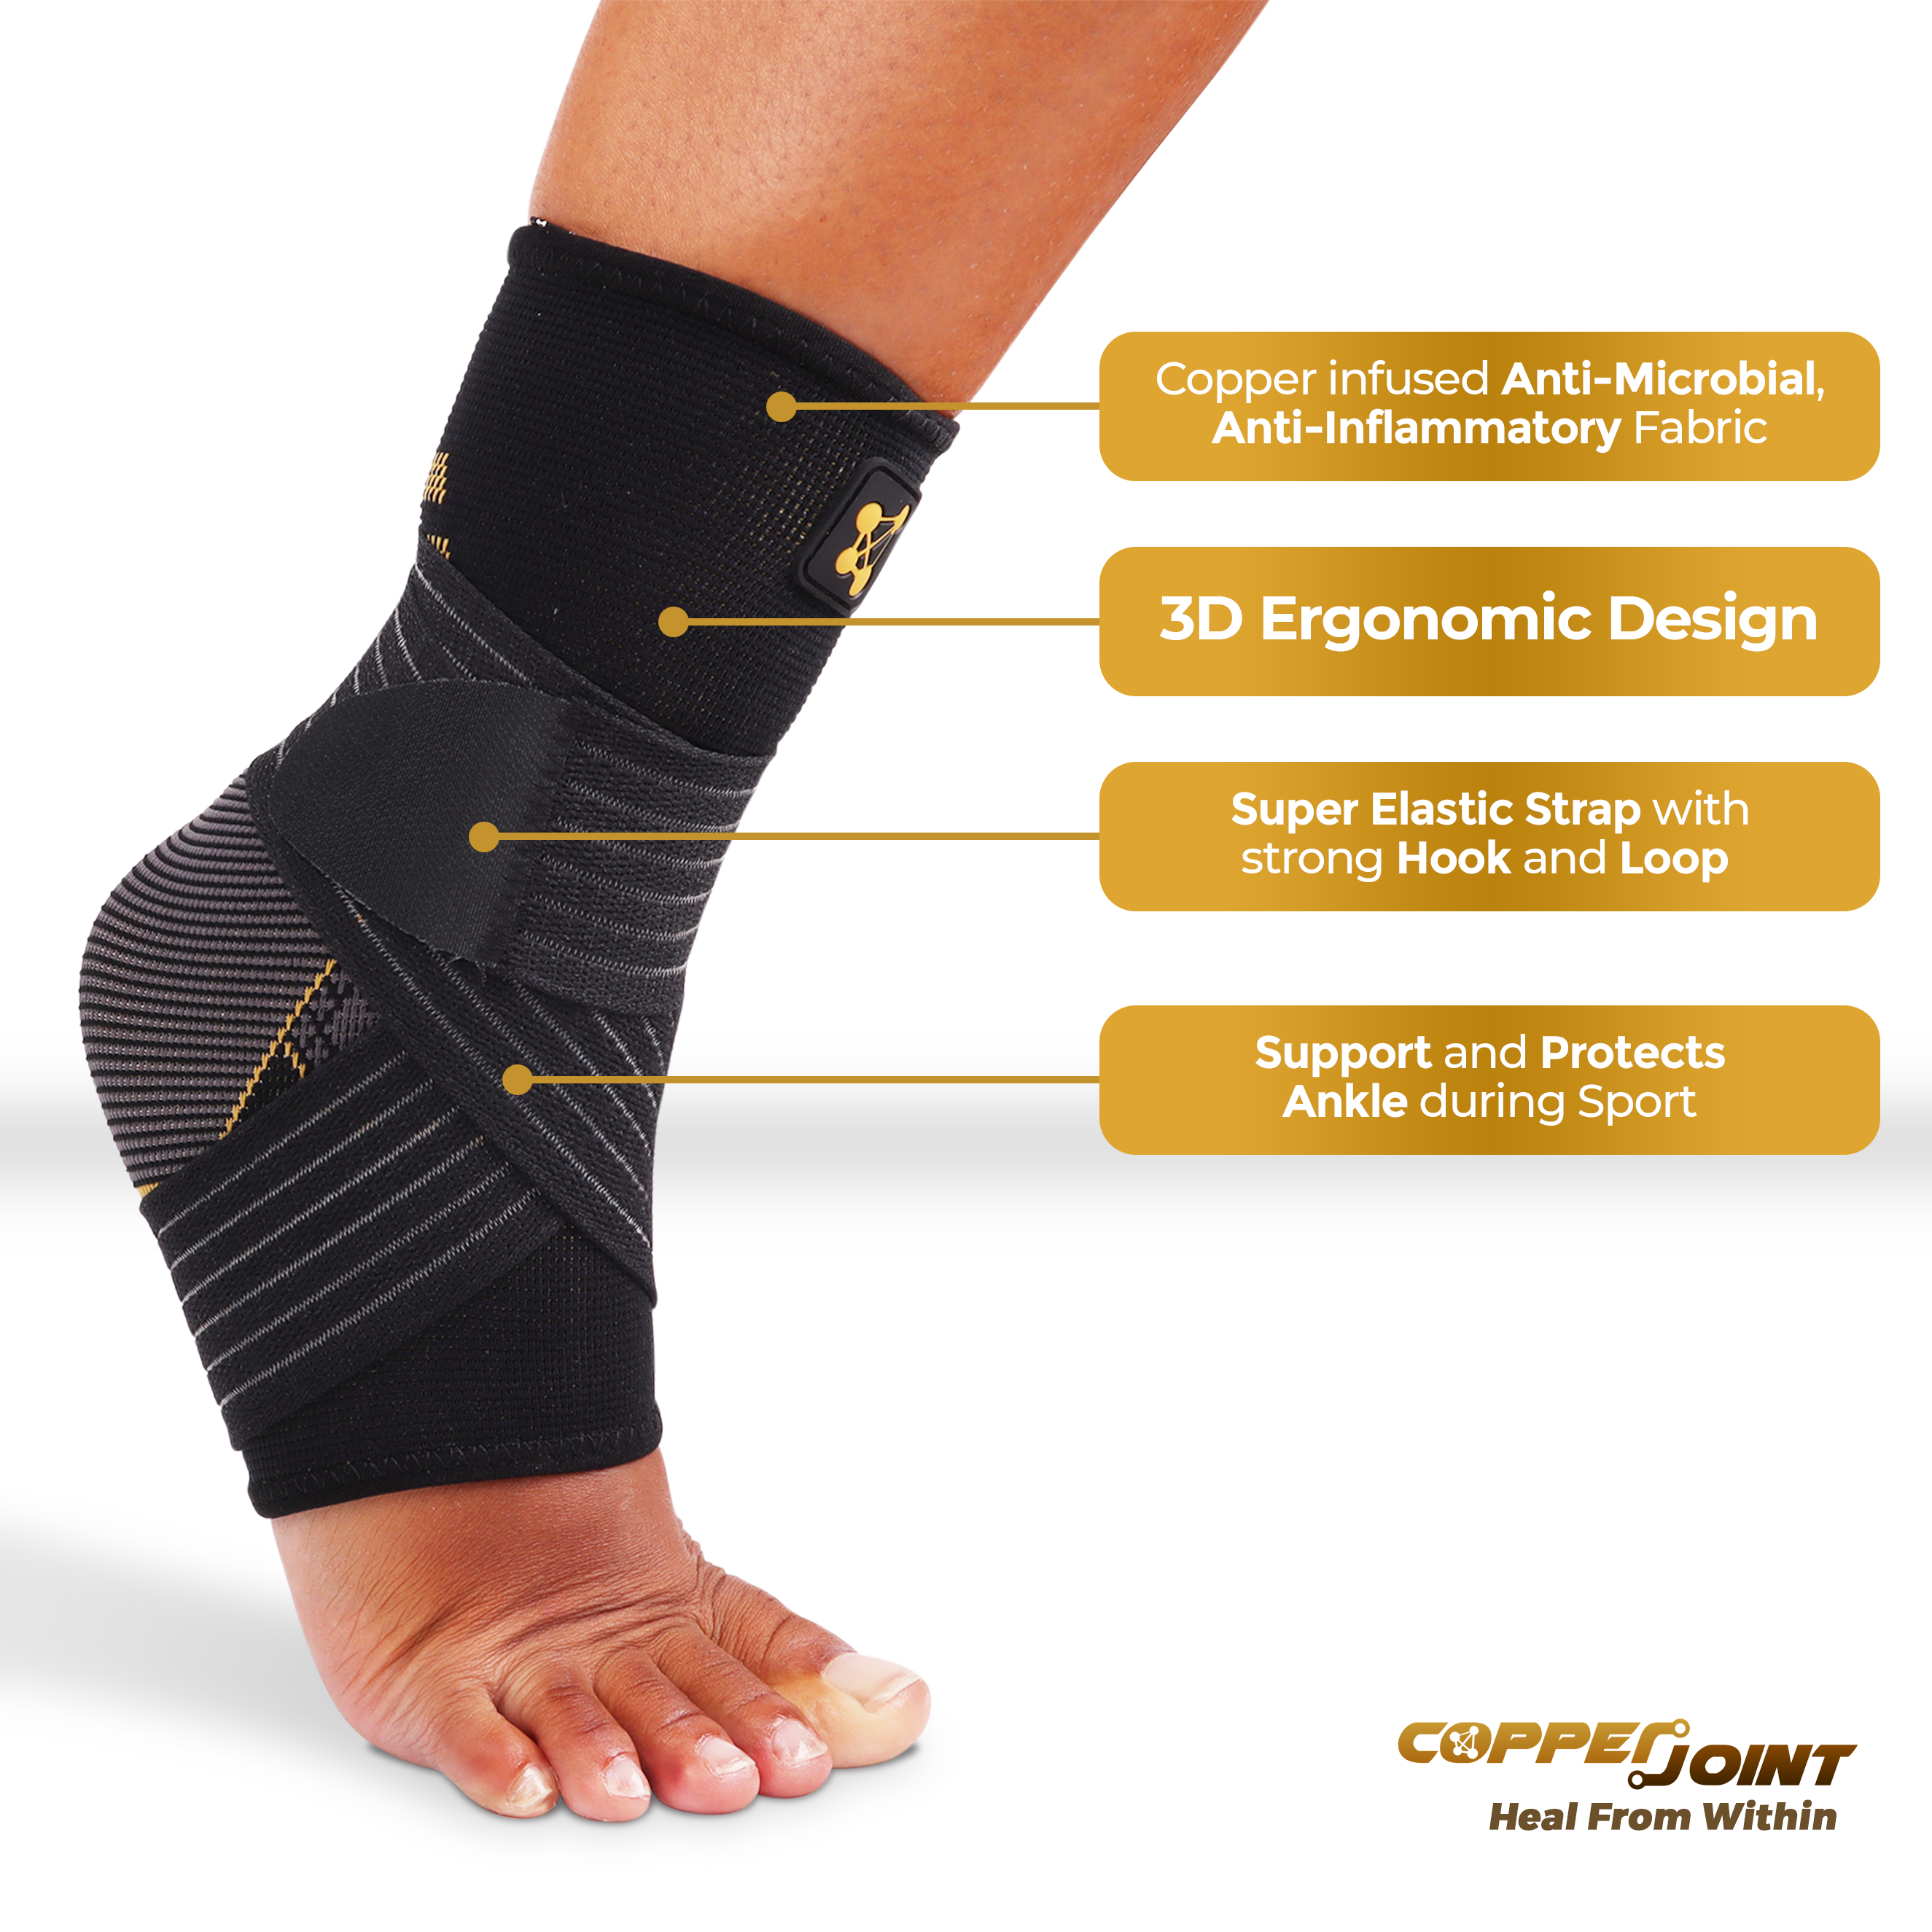 The New CopperJoint Compression Ankle Support Is Applauded By Patients For Its Ease Of Use